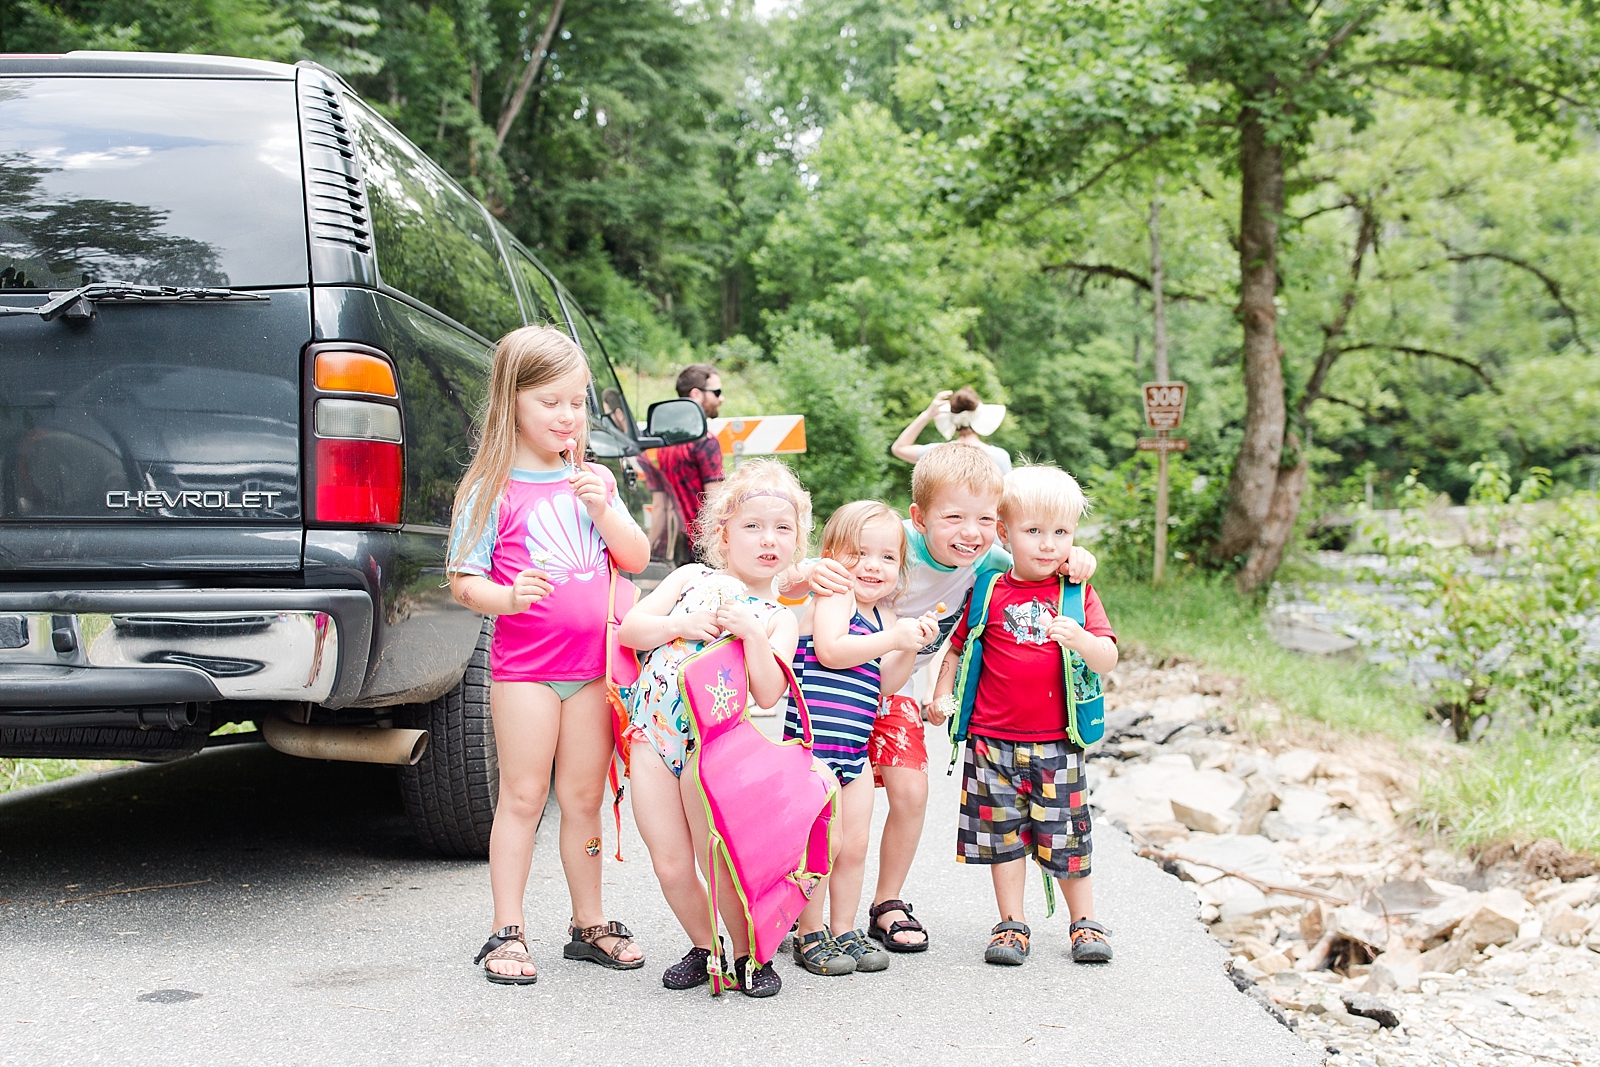 Nantahala River group of little kids with SUV in the background photo